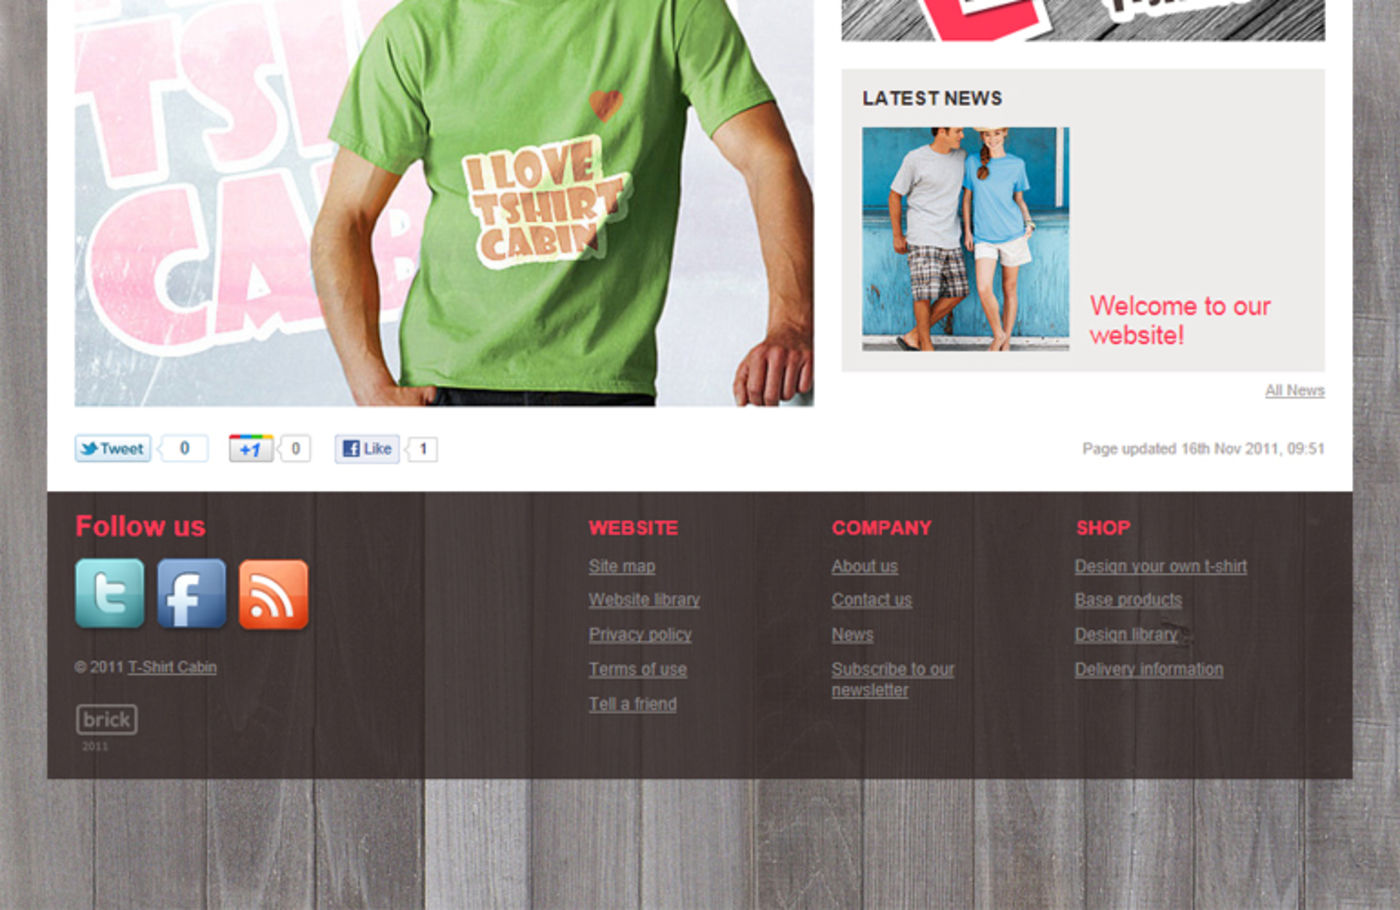 T-Shirt Cabin Homepage footer